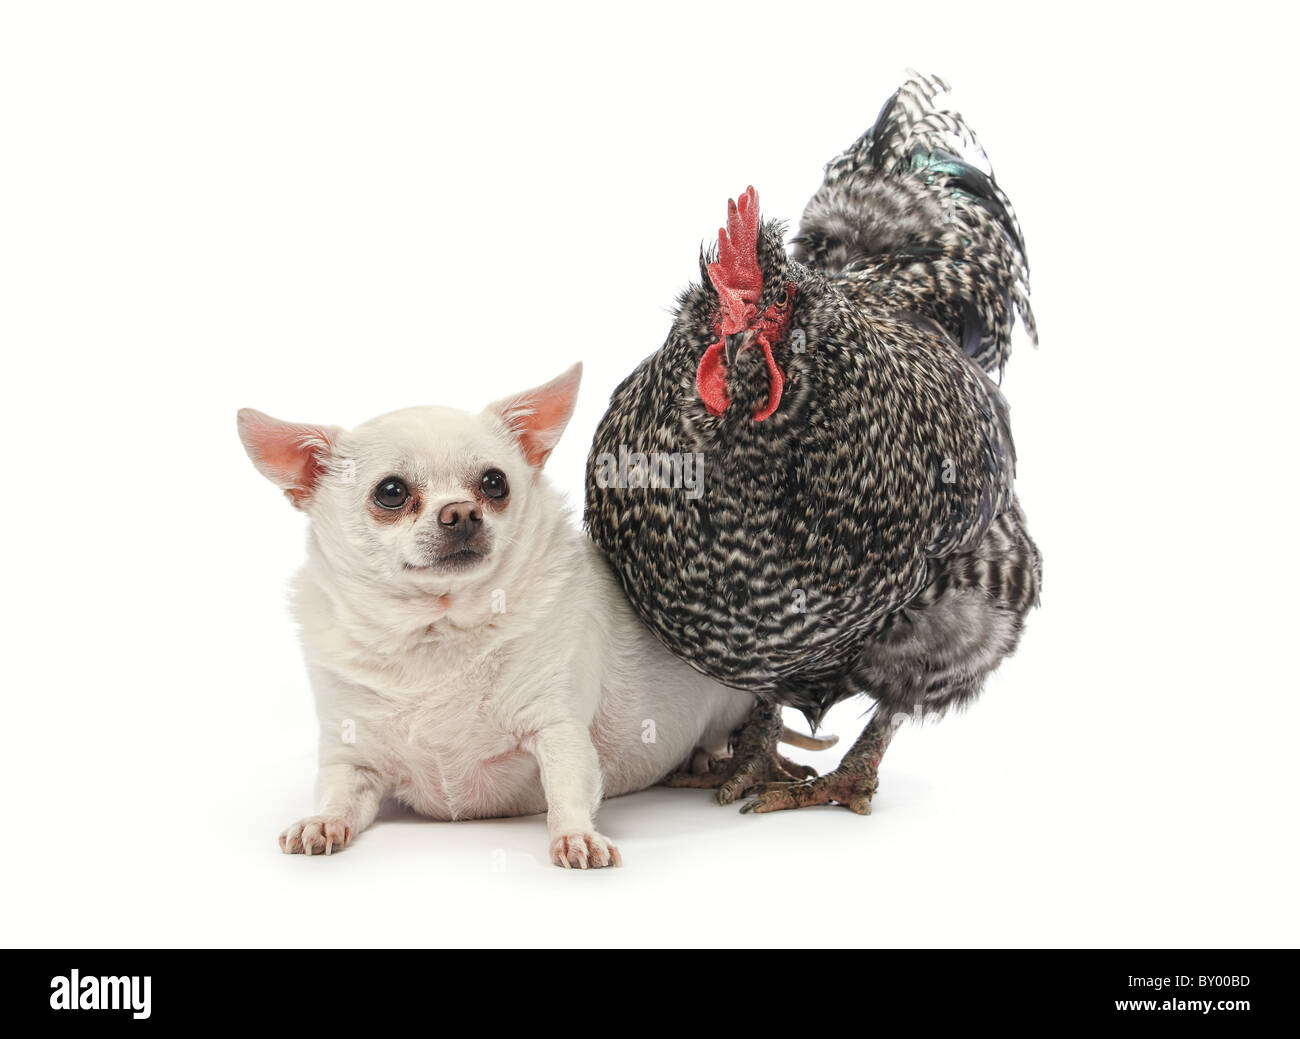 funny fat chihuahua and rooster standing together on white background Stock Photo